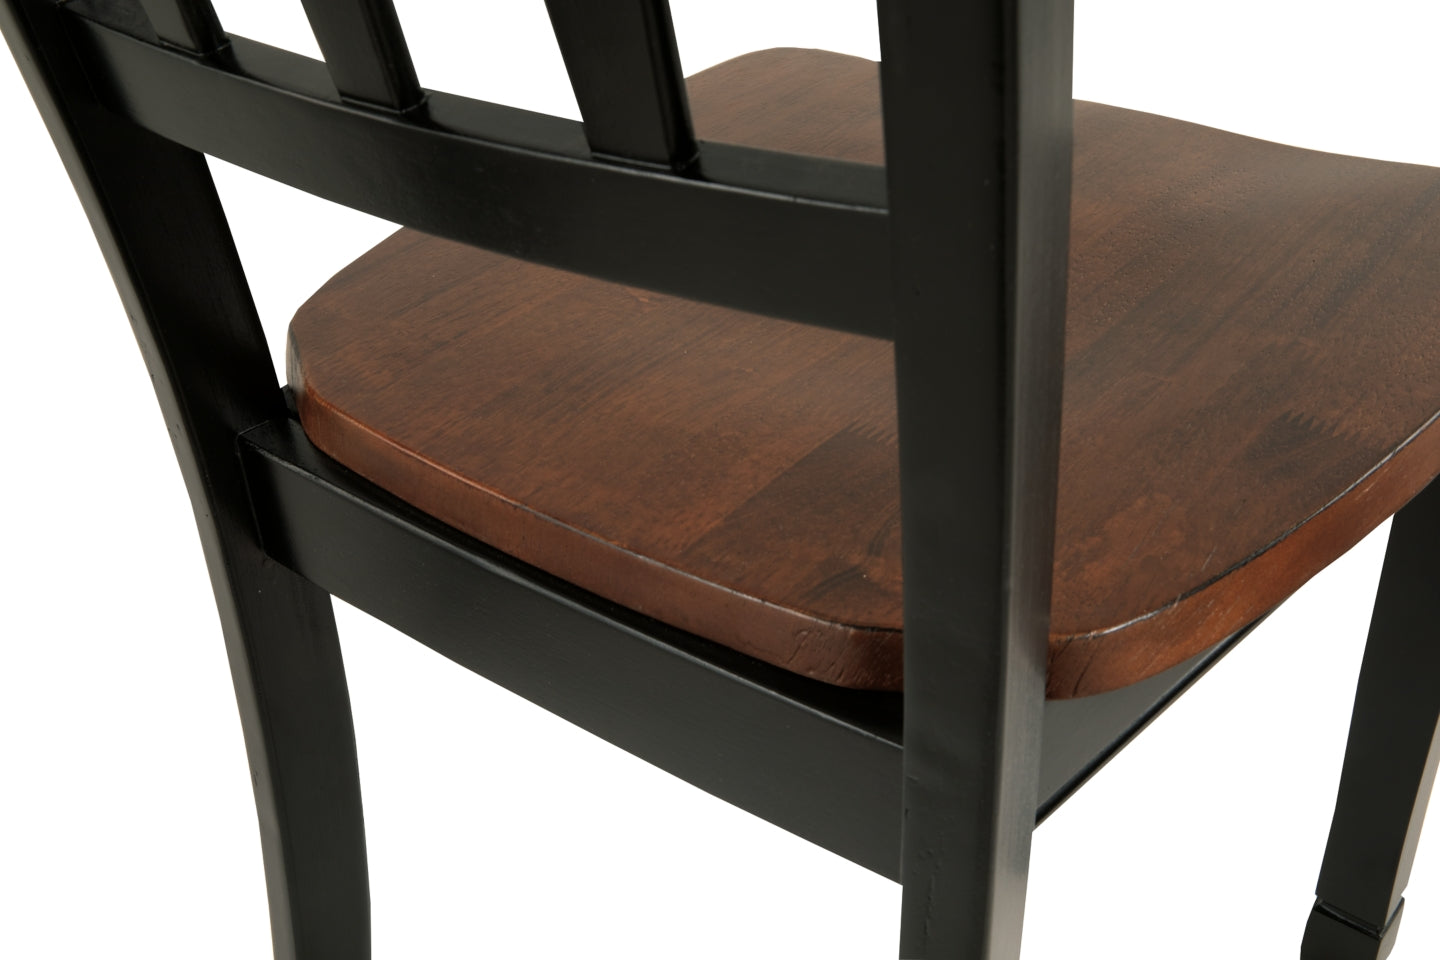 Owingsville 2-Piece Dining Room Chair